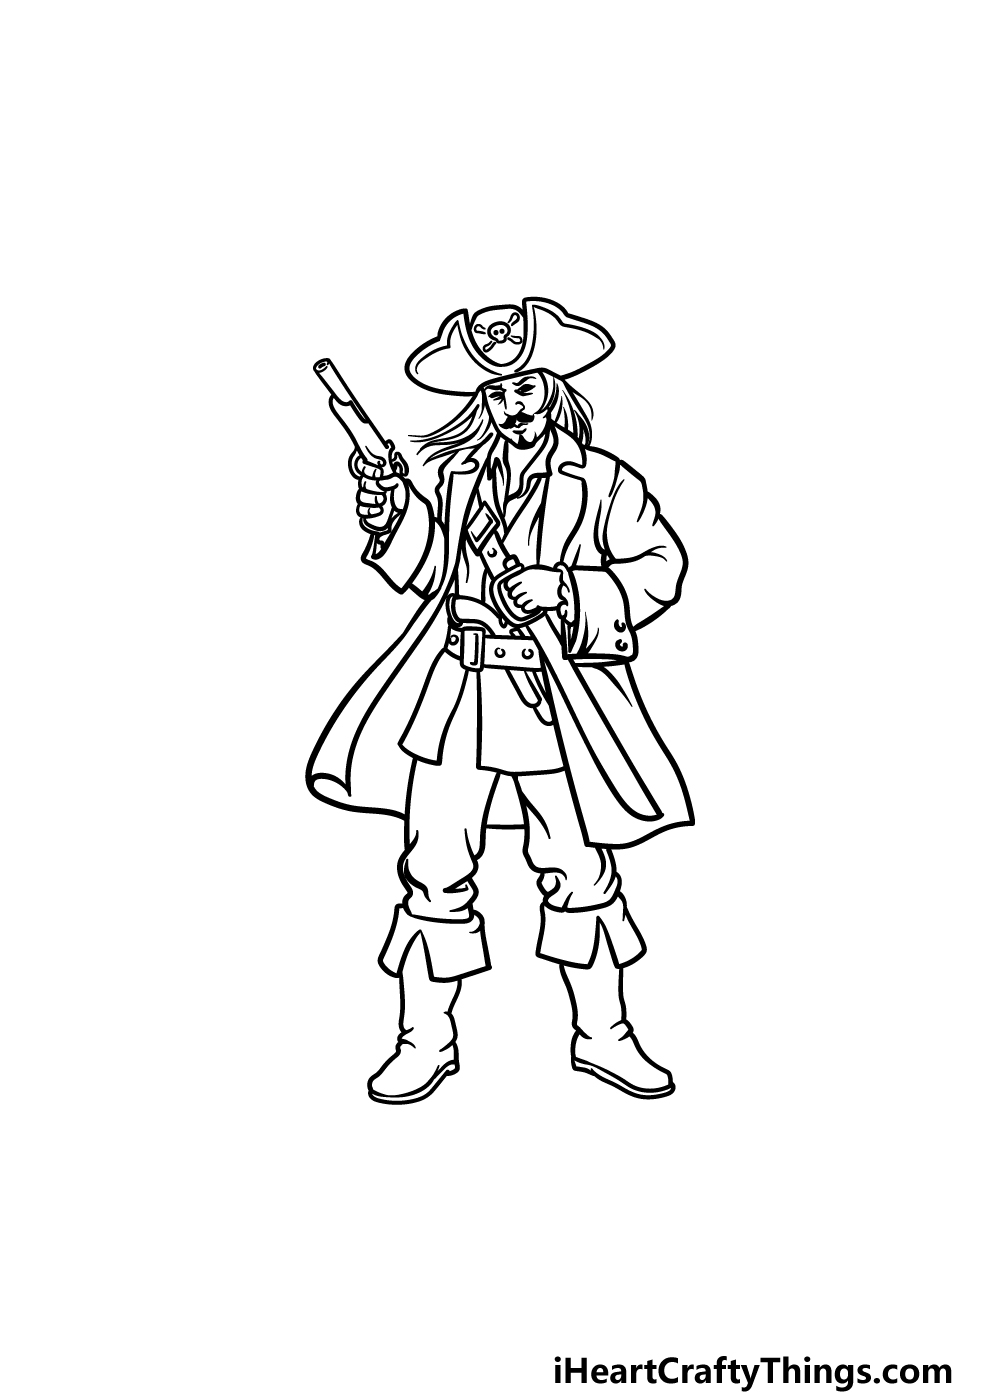 drawing a pirate step 6